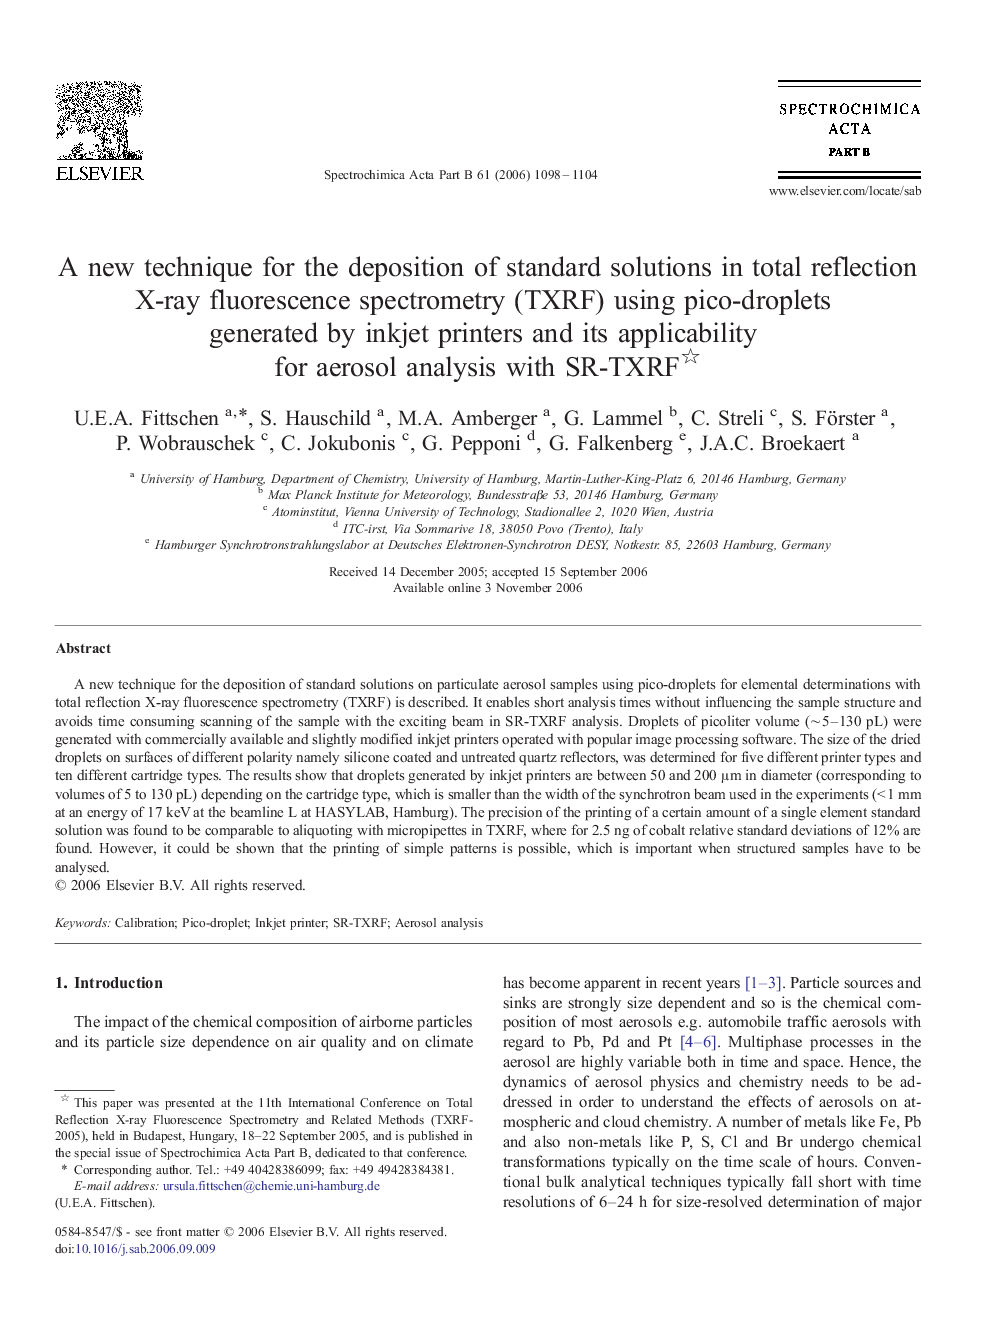 A new technique for the deposition of standard solutions in total reflection X-ray fluorescence spectrometry (TXRF) using pico-droplets generated by inkjet printers and its applicability for aerosol analysis with SR-TXRF 